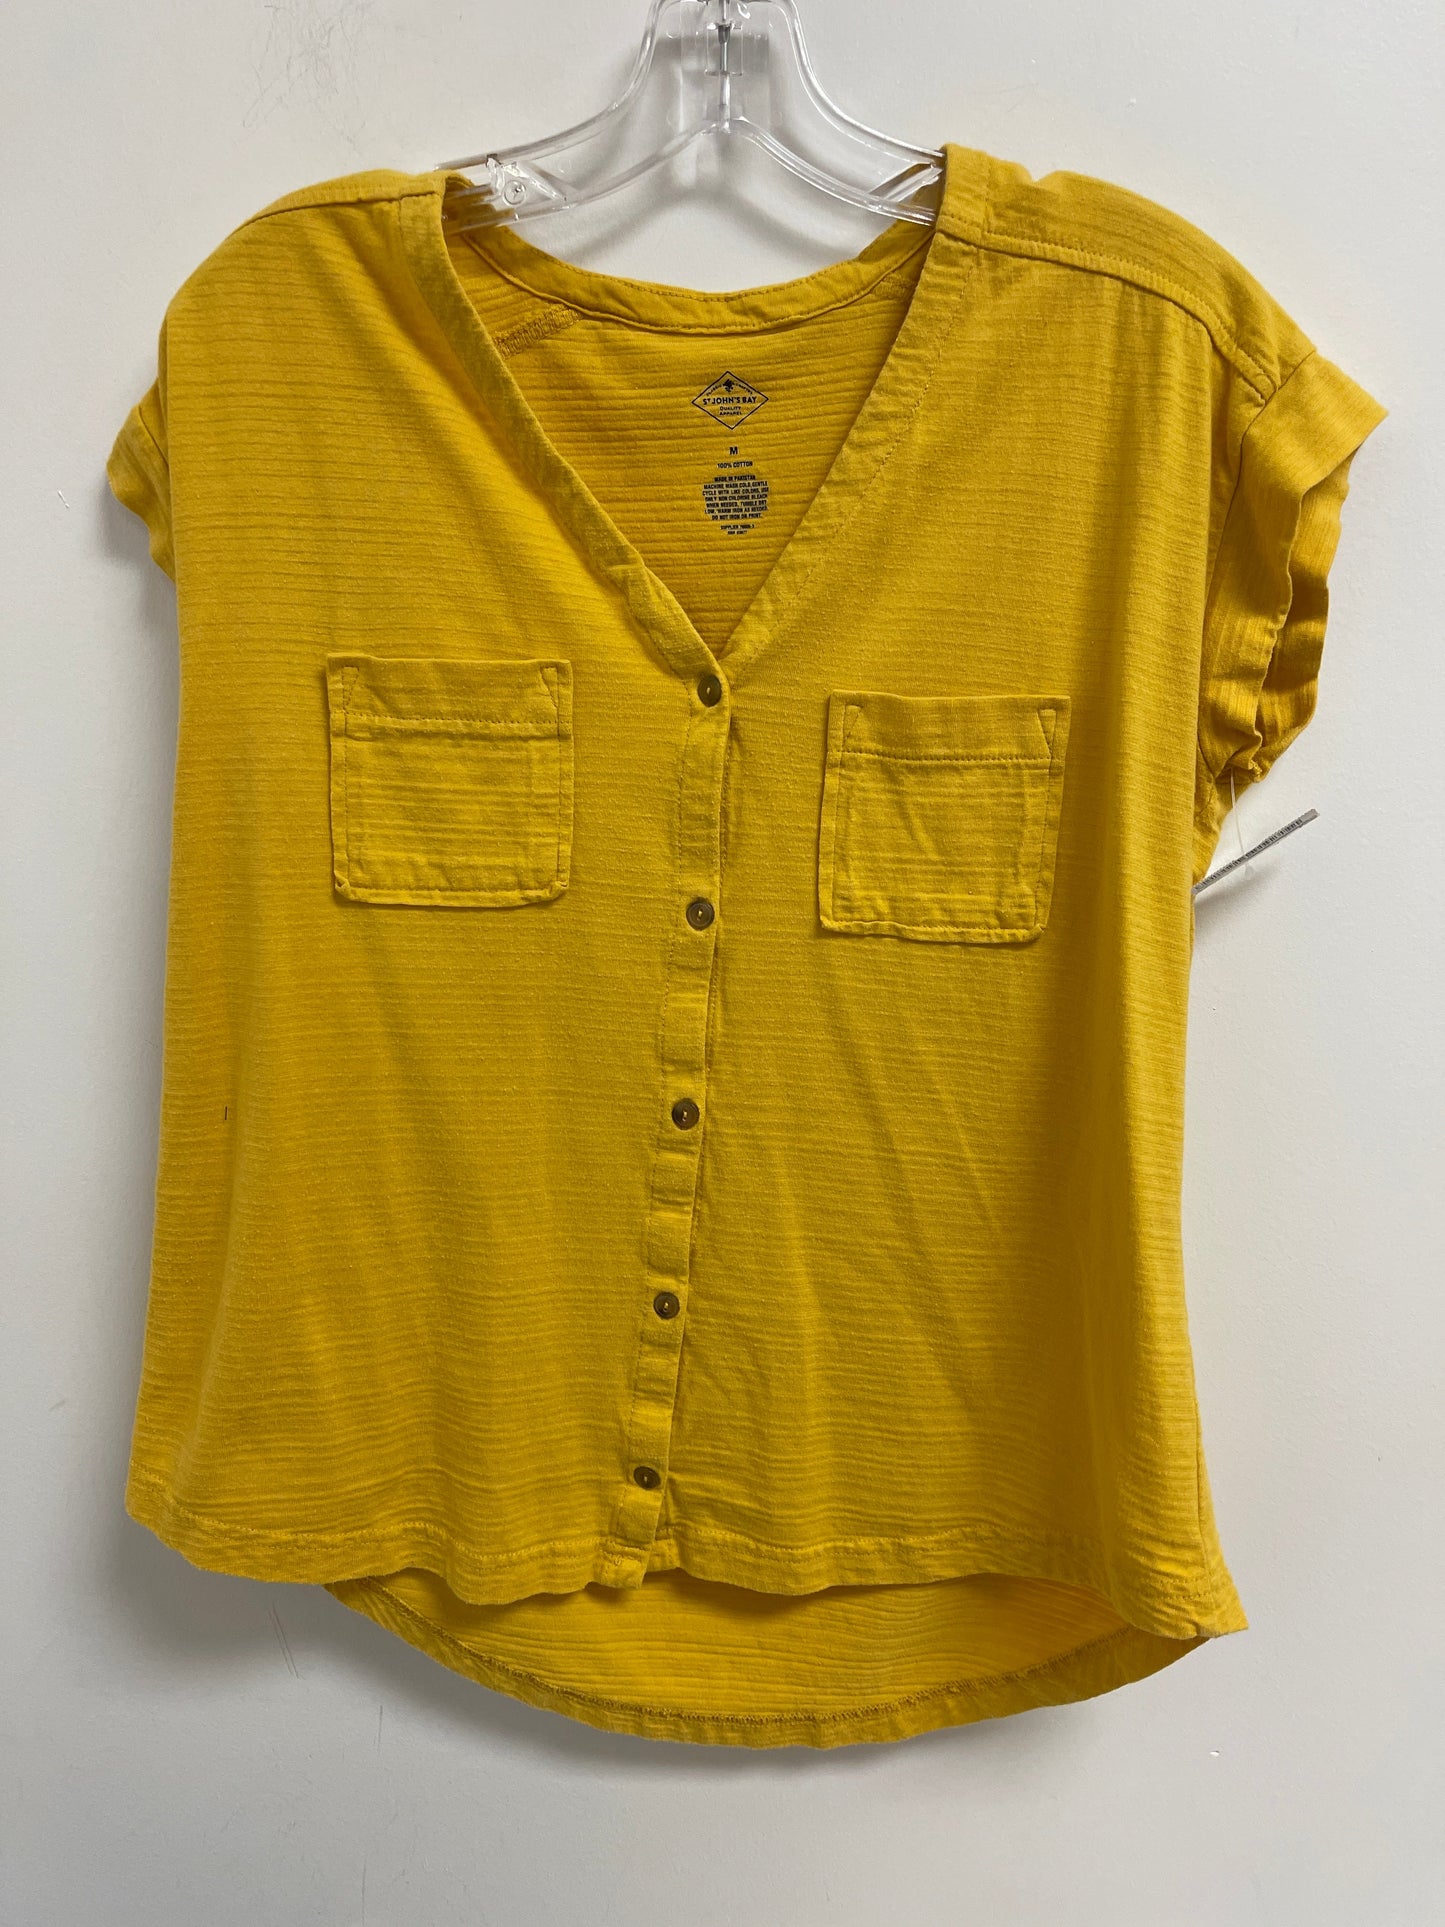 Yellow Top Short Sleeve St Johns Bay, Size M